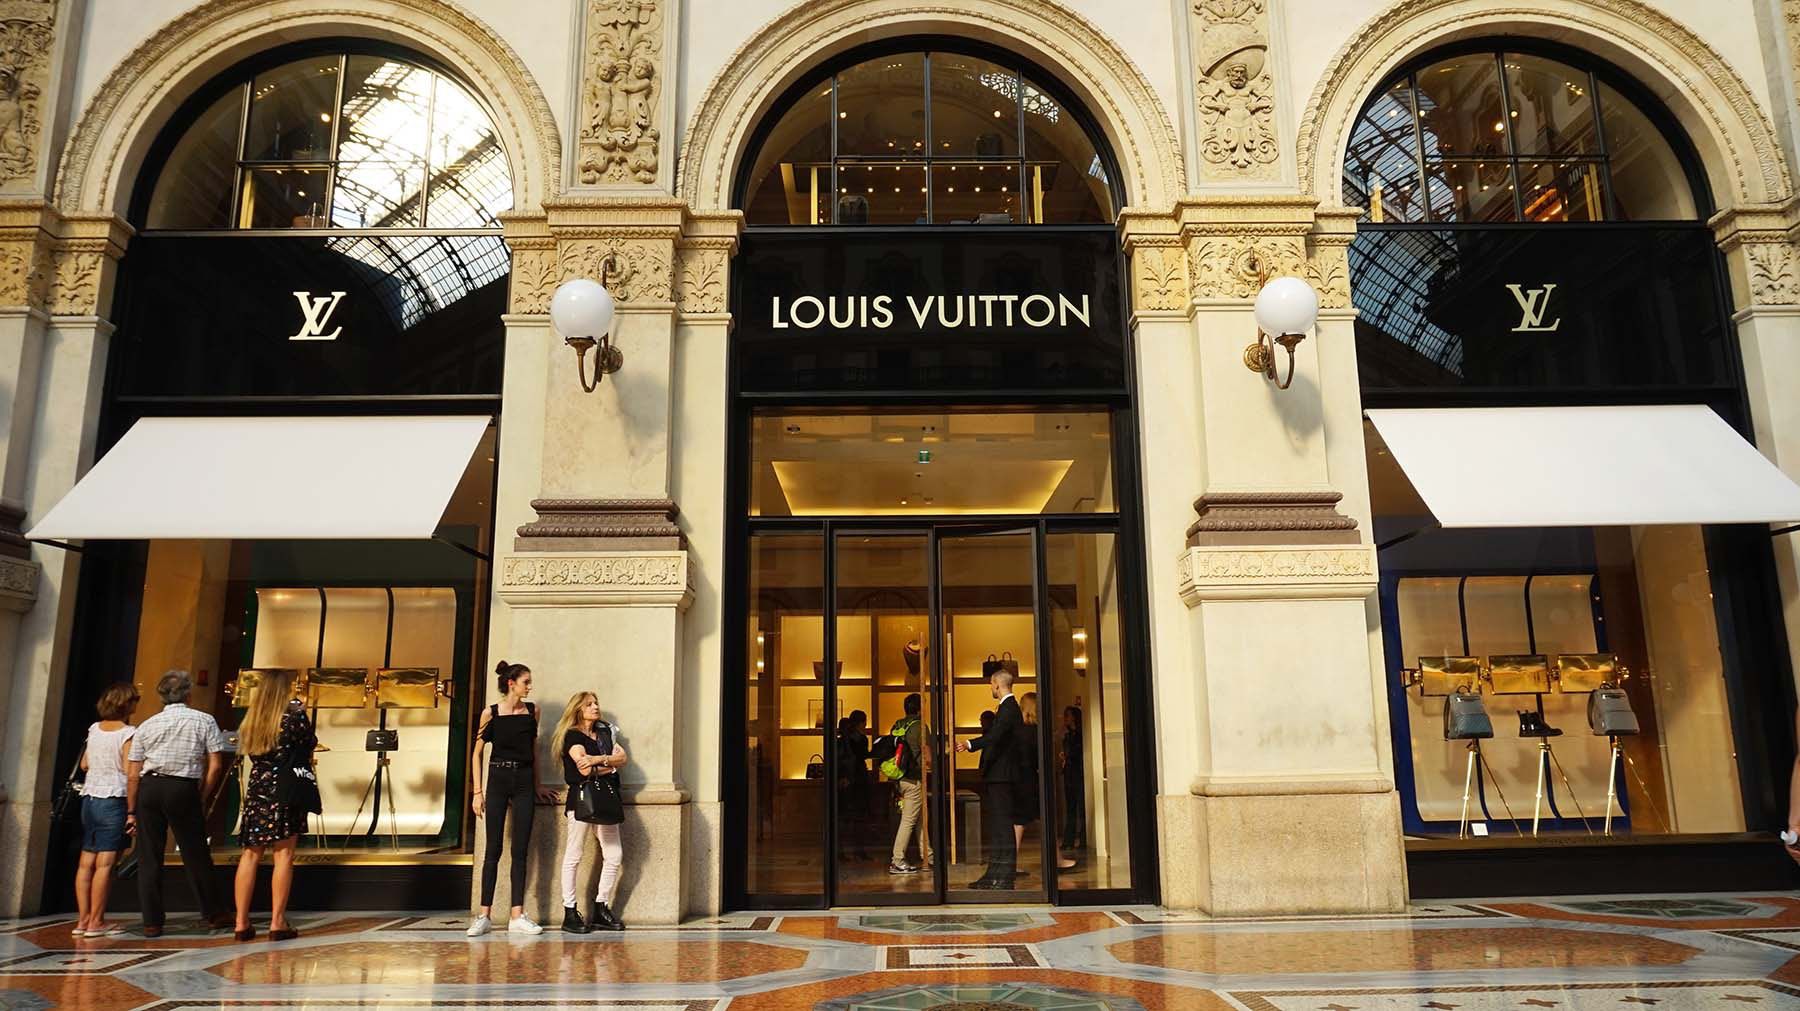 What The Belmond Acquisition Means For LVMH